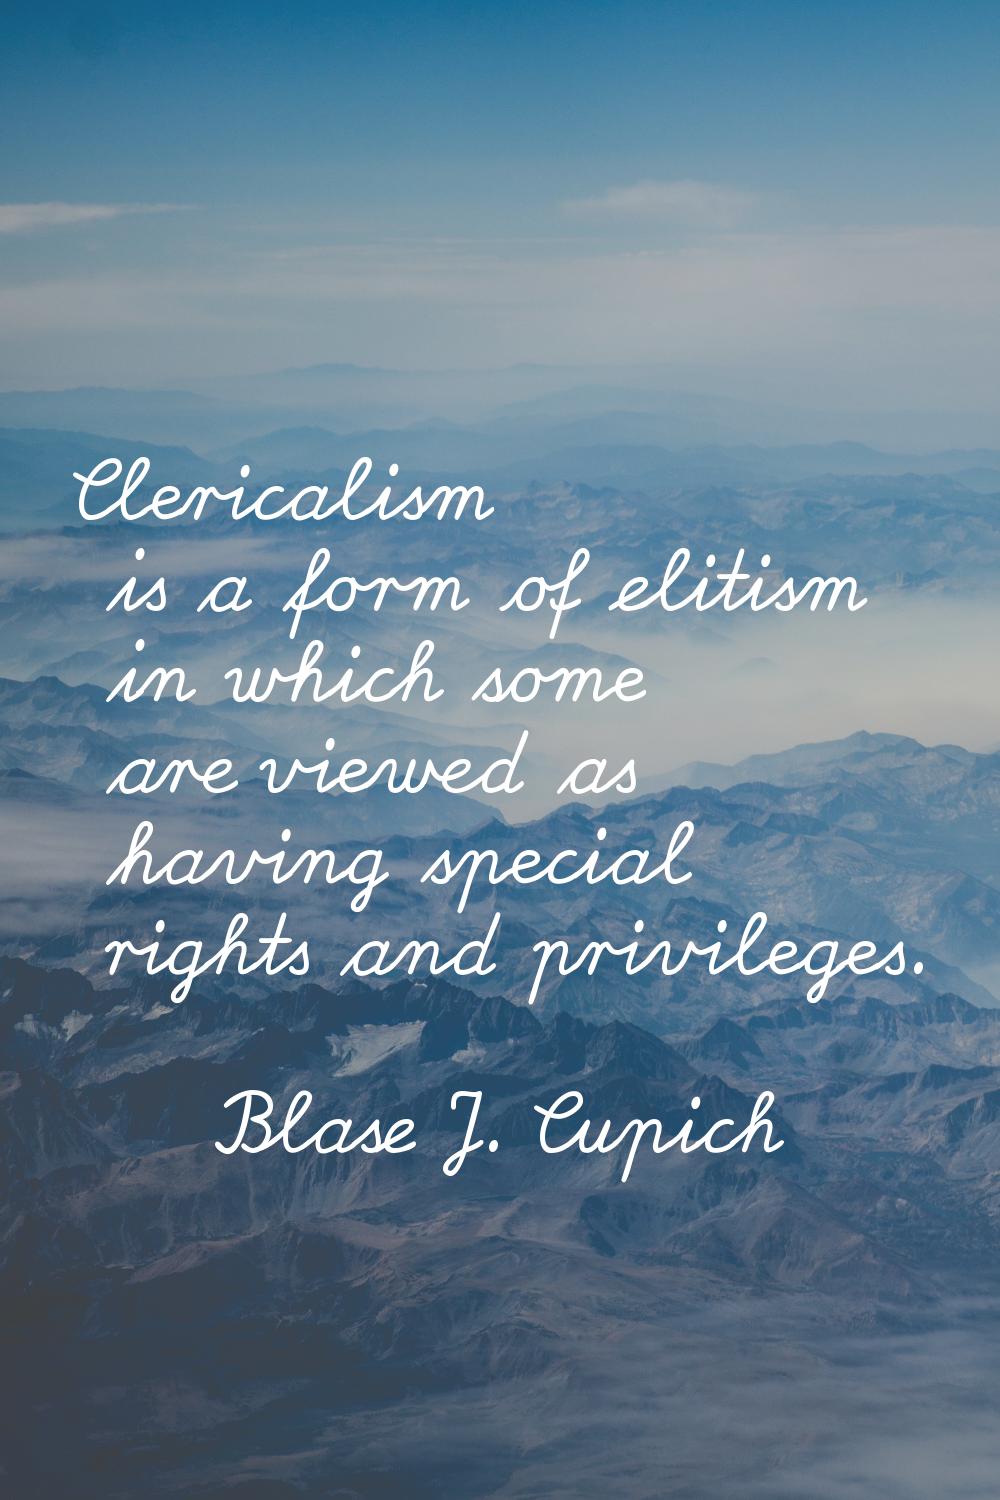 Clericalism is a form of elitism in which some are viewed as having special rights and privileges.